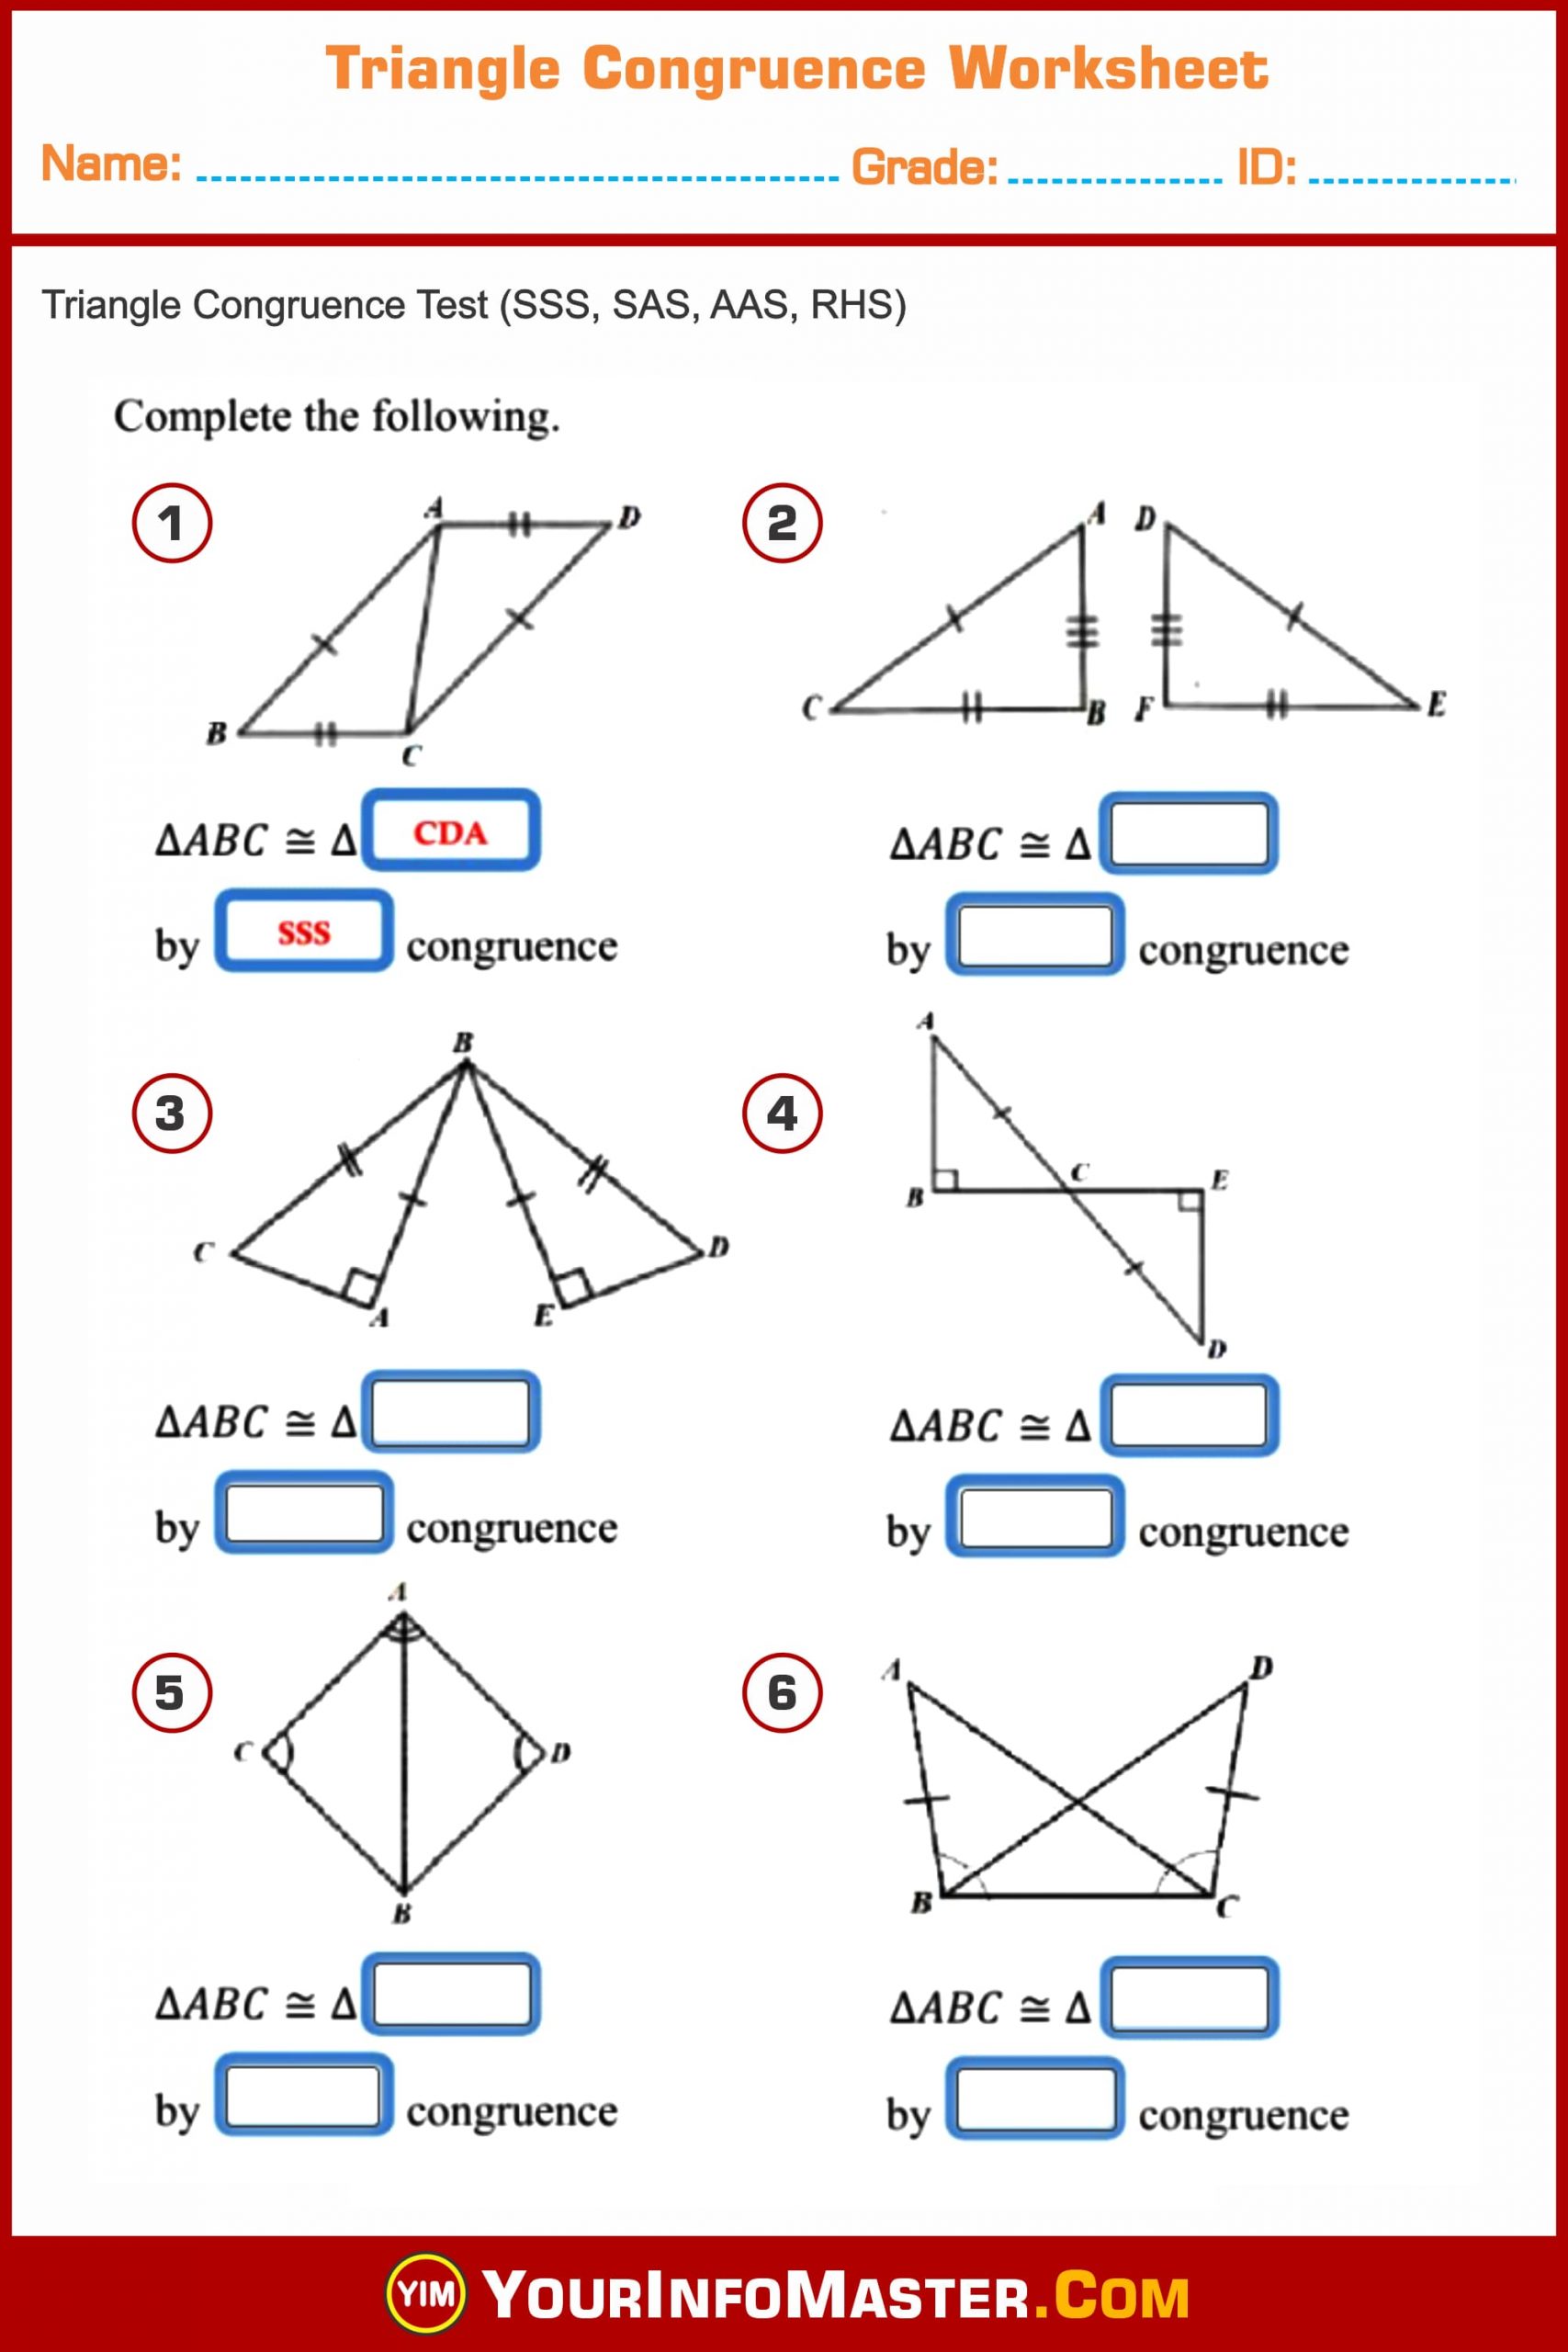 Triangle Congruence Worksheet - Your Info Master With Regard To Triangle Congruence Practice Worksheet